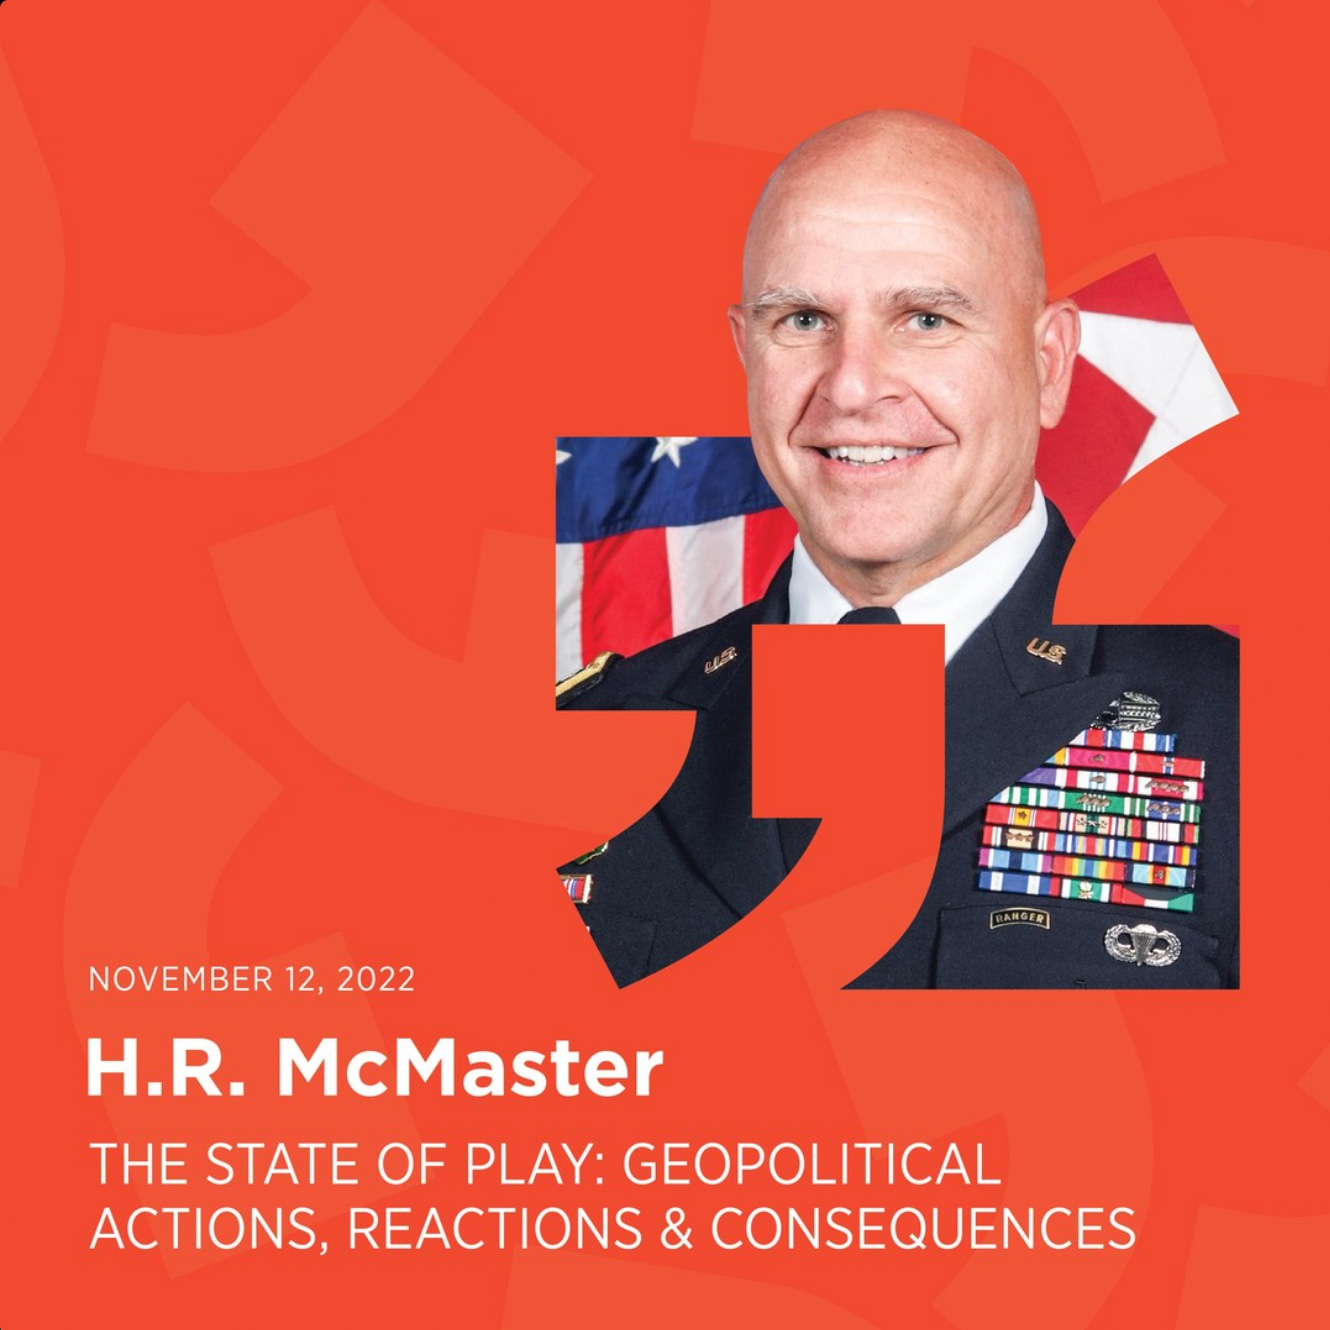 Event promo for H.R. McMaster